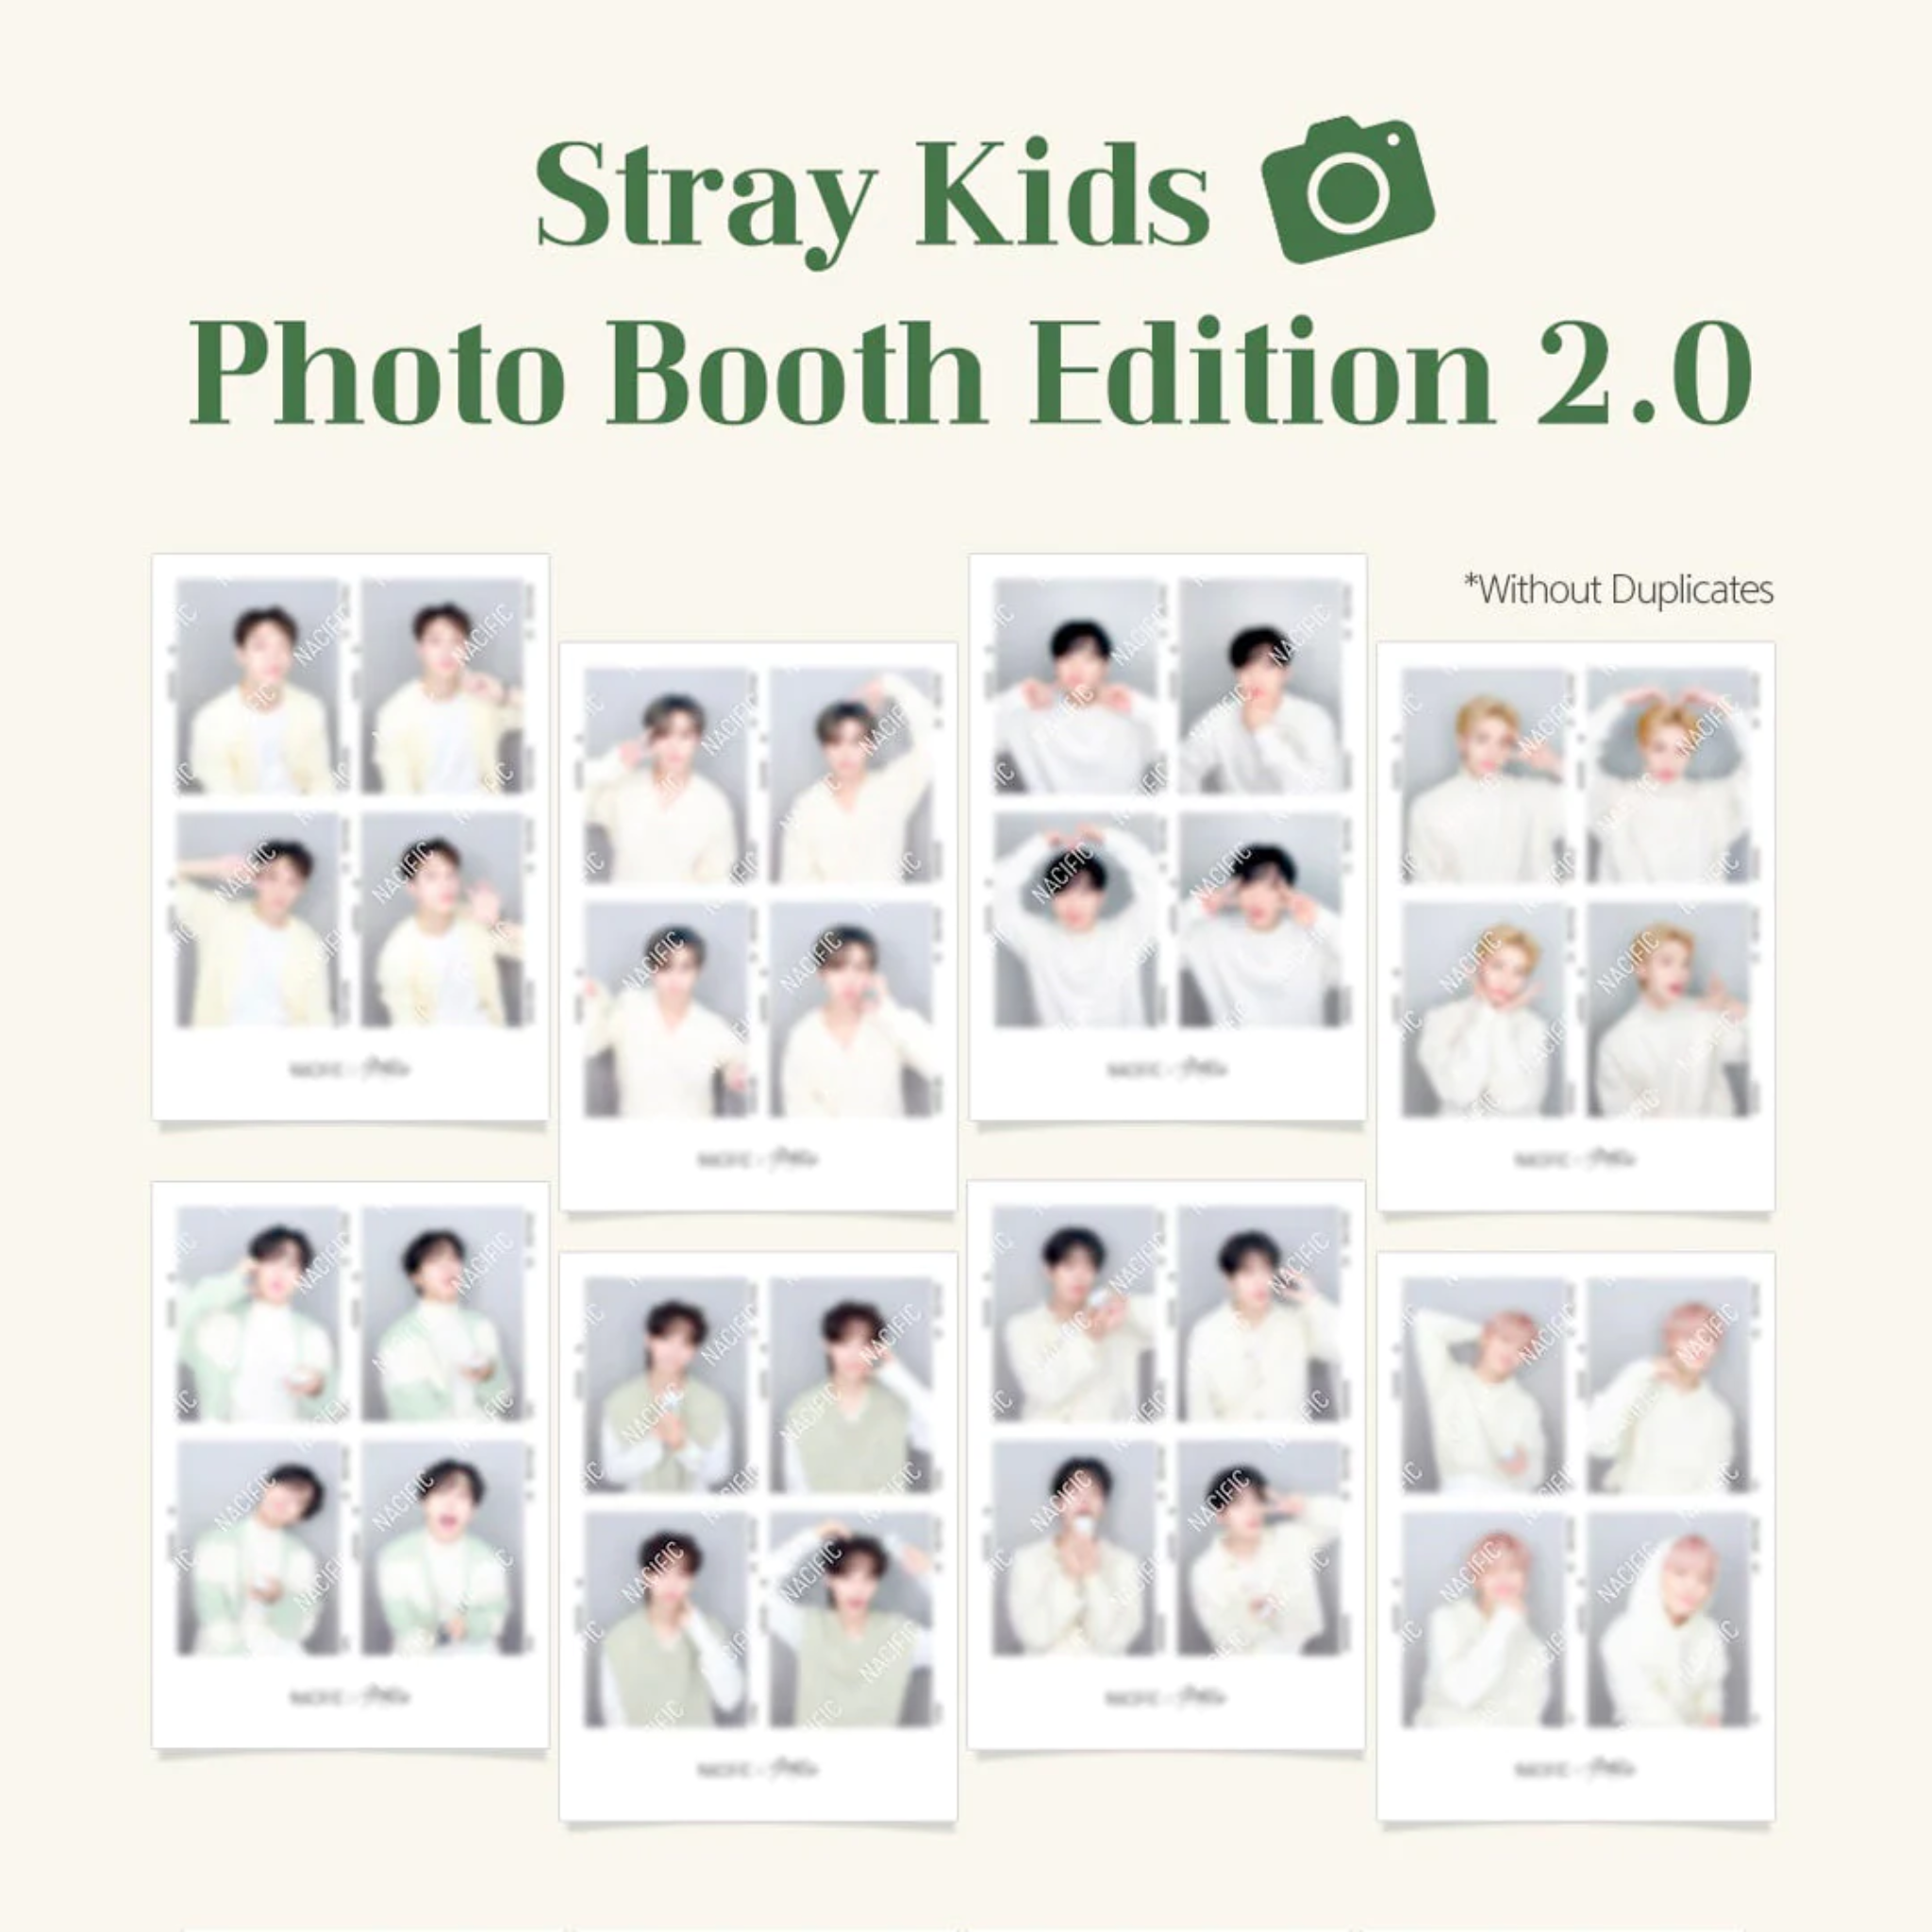 NACIFIC X STRAY KIDS Studio Photo Booth OT8 Photocards (Limited Edition) inside